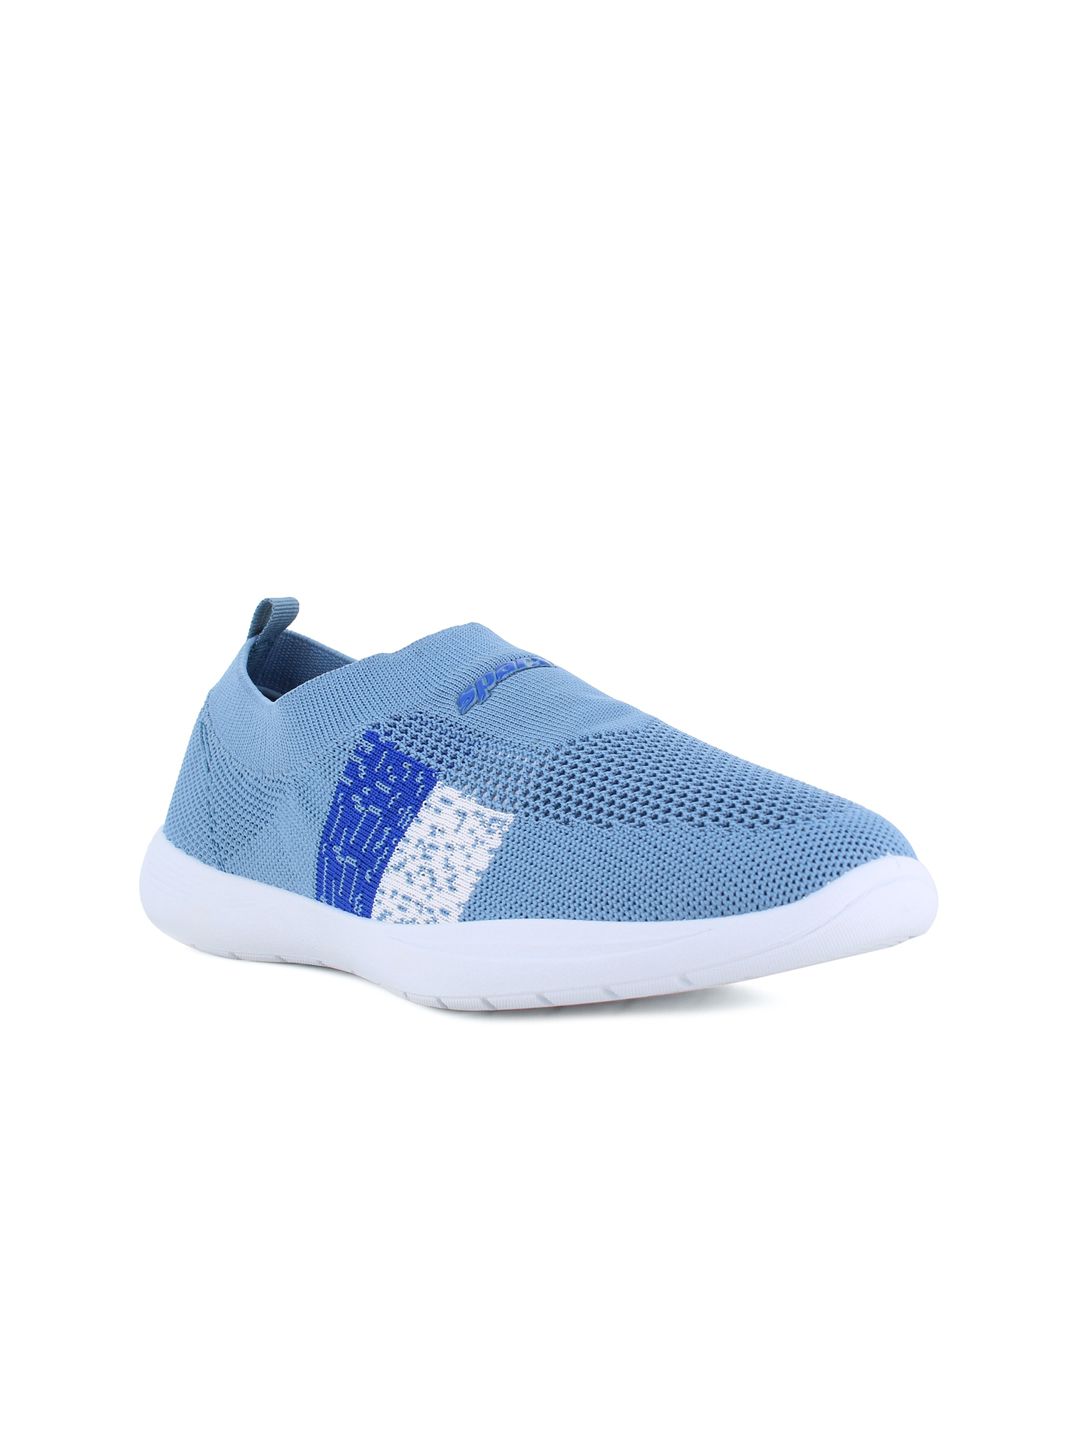 Sparx Women Blue Woven Design Slip-On Sneakers Price in India